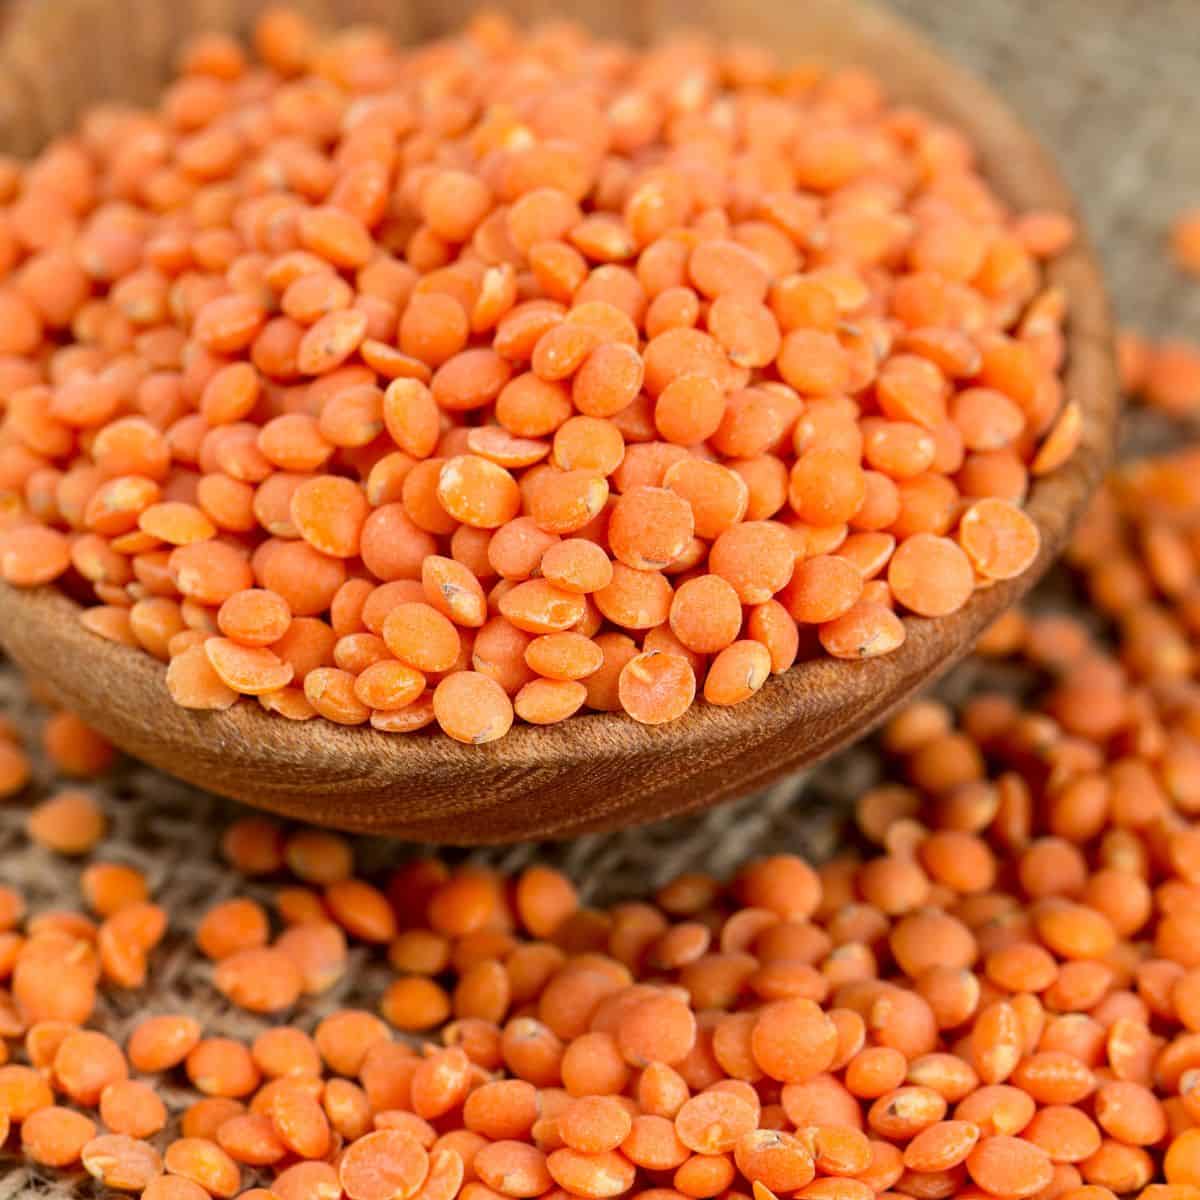 Red lentils in wood bowl.